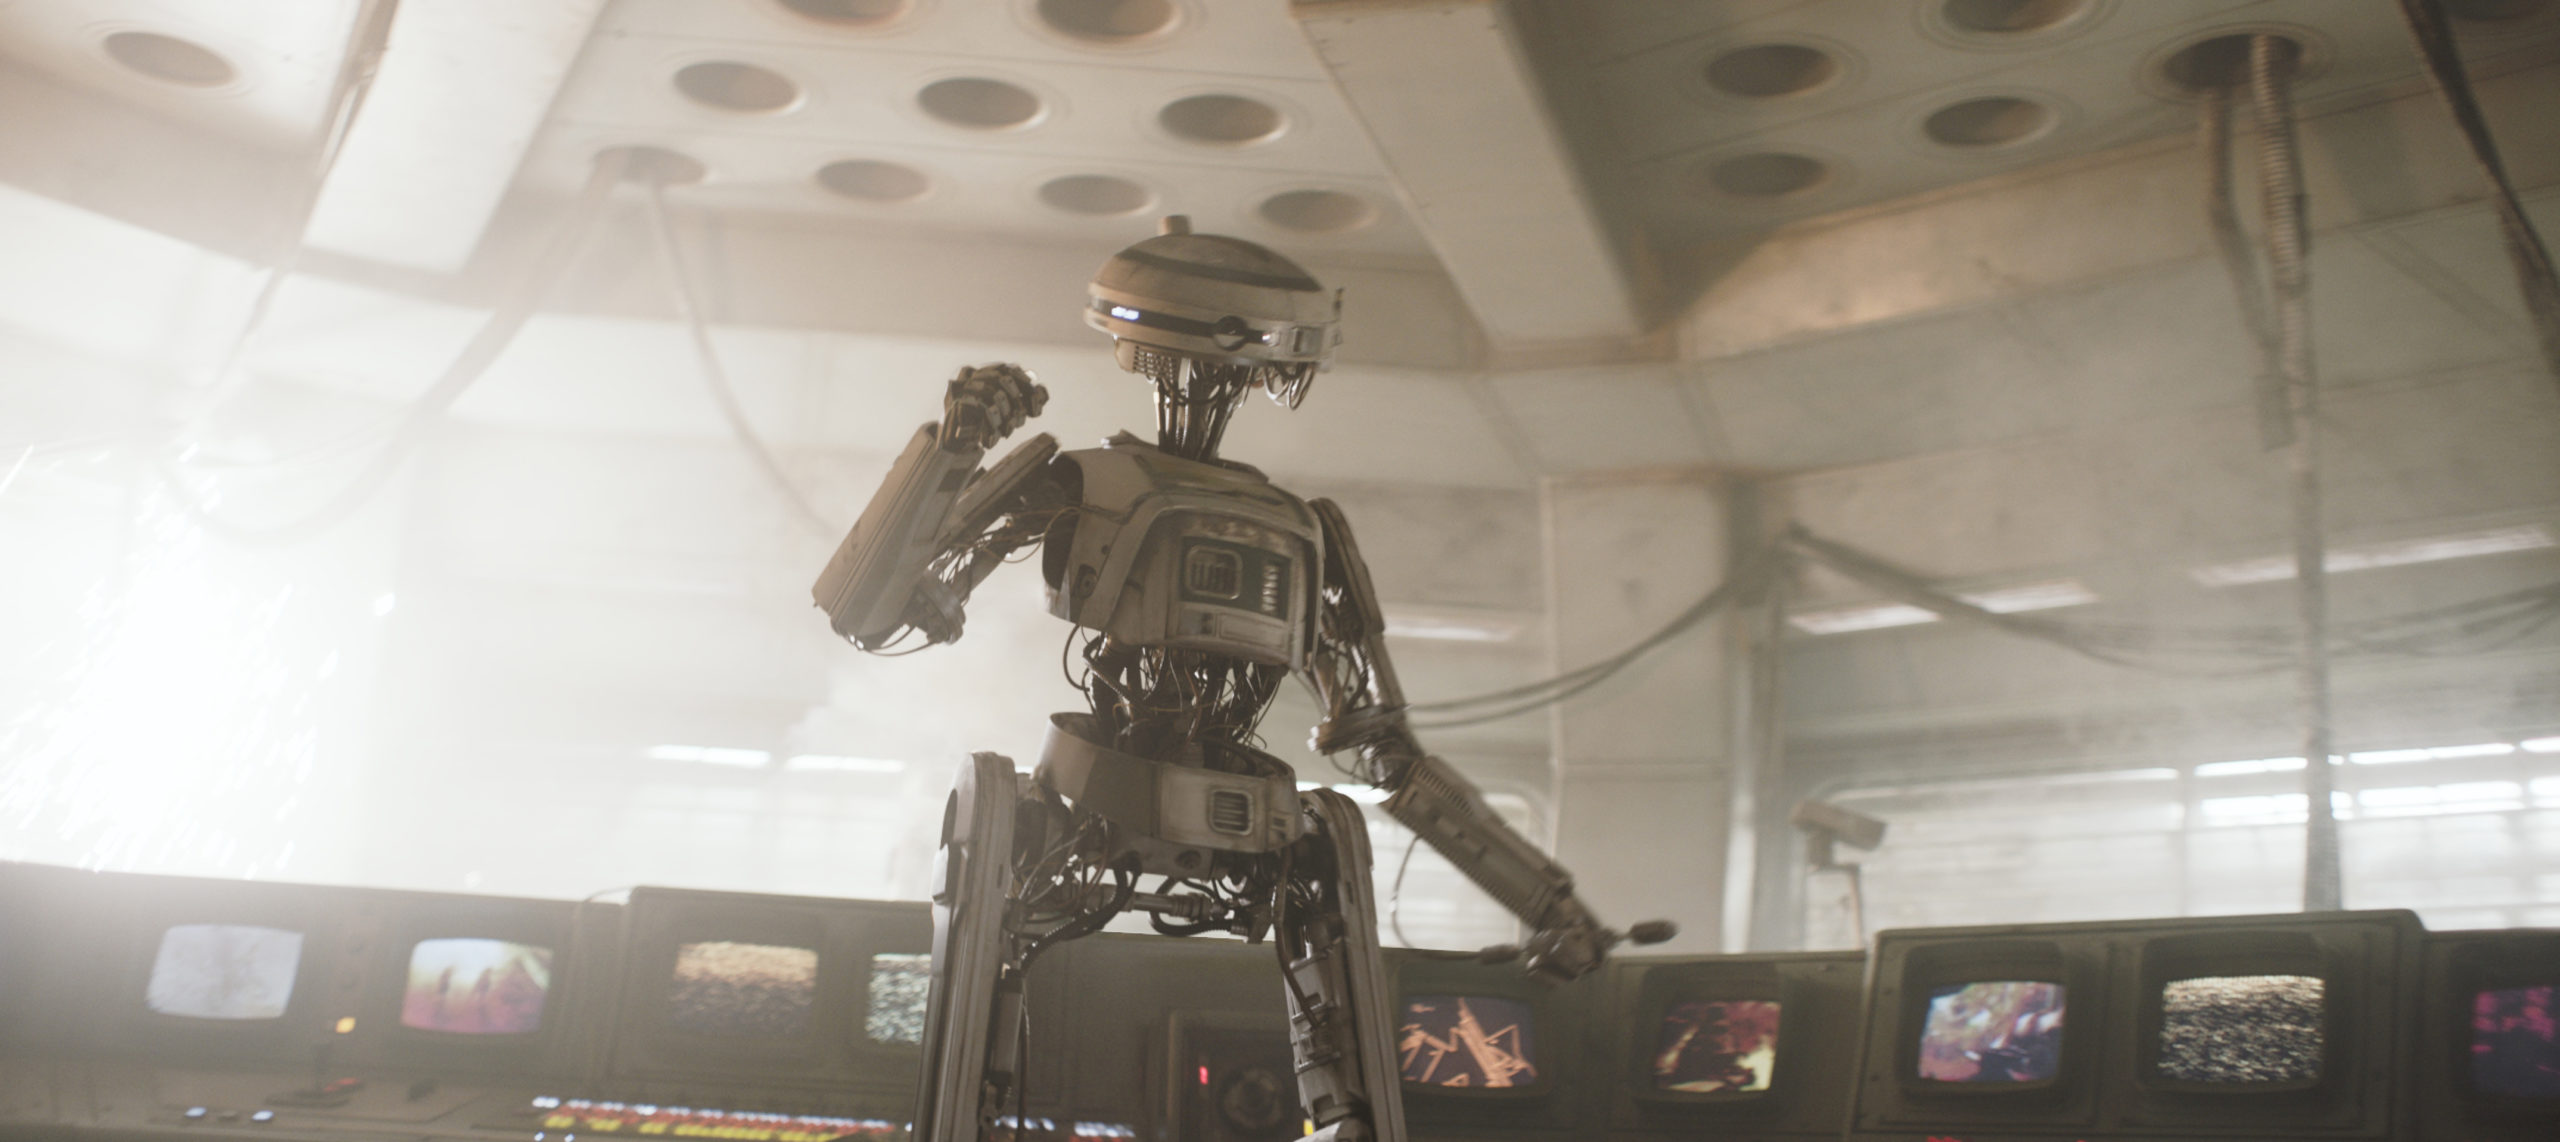 Why Don’t We Know More About Star Wars’ Droids?